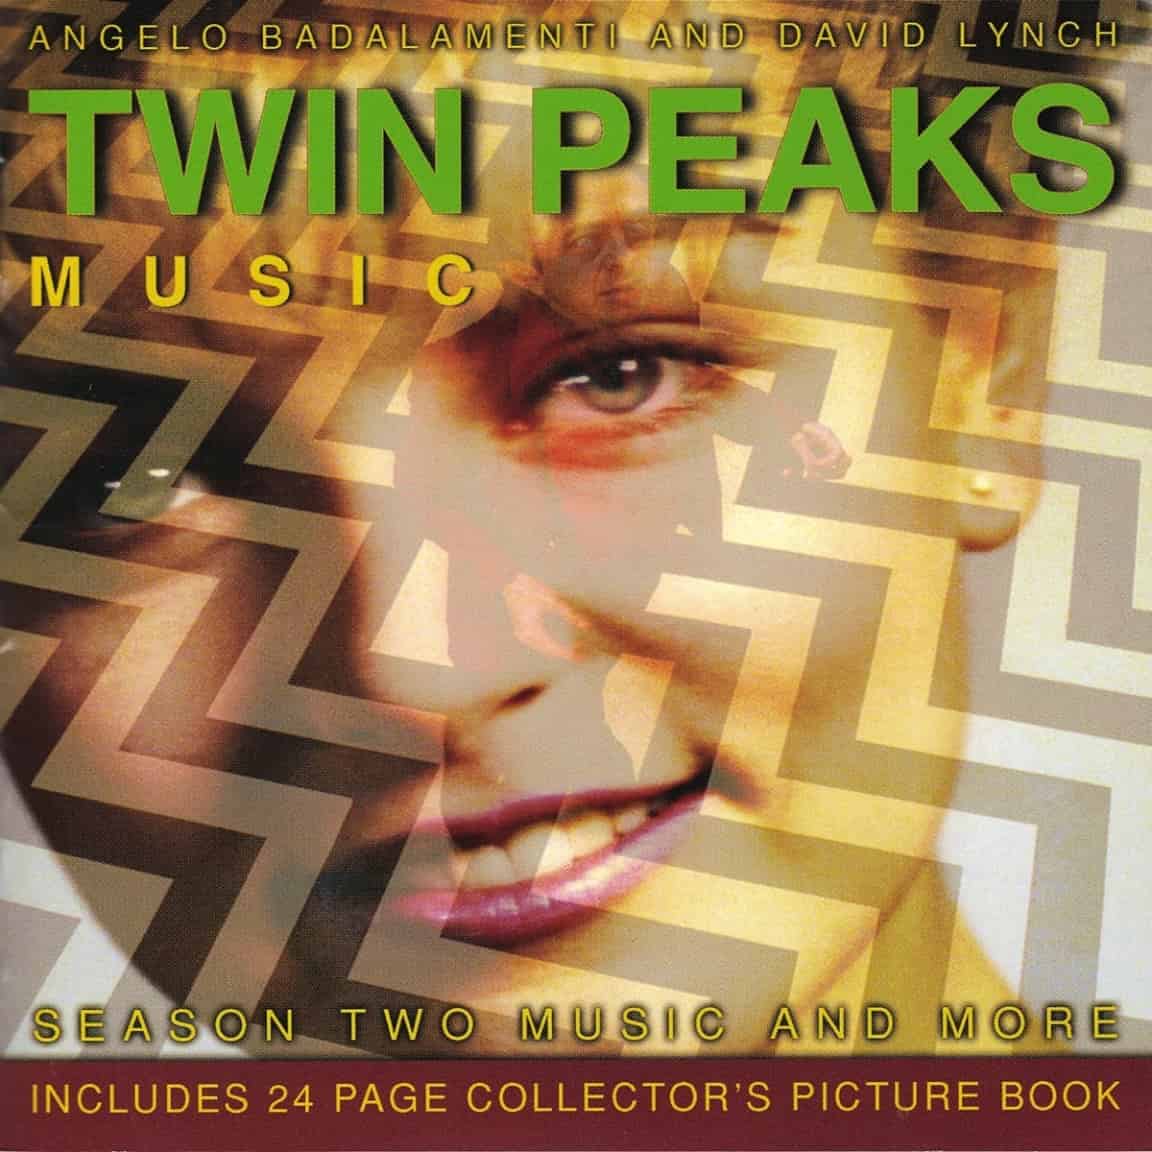 Twin Peaks Season Two Music And More Soundtrack Gets Vinyl Release On